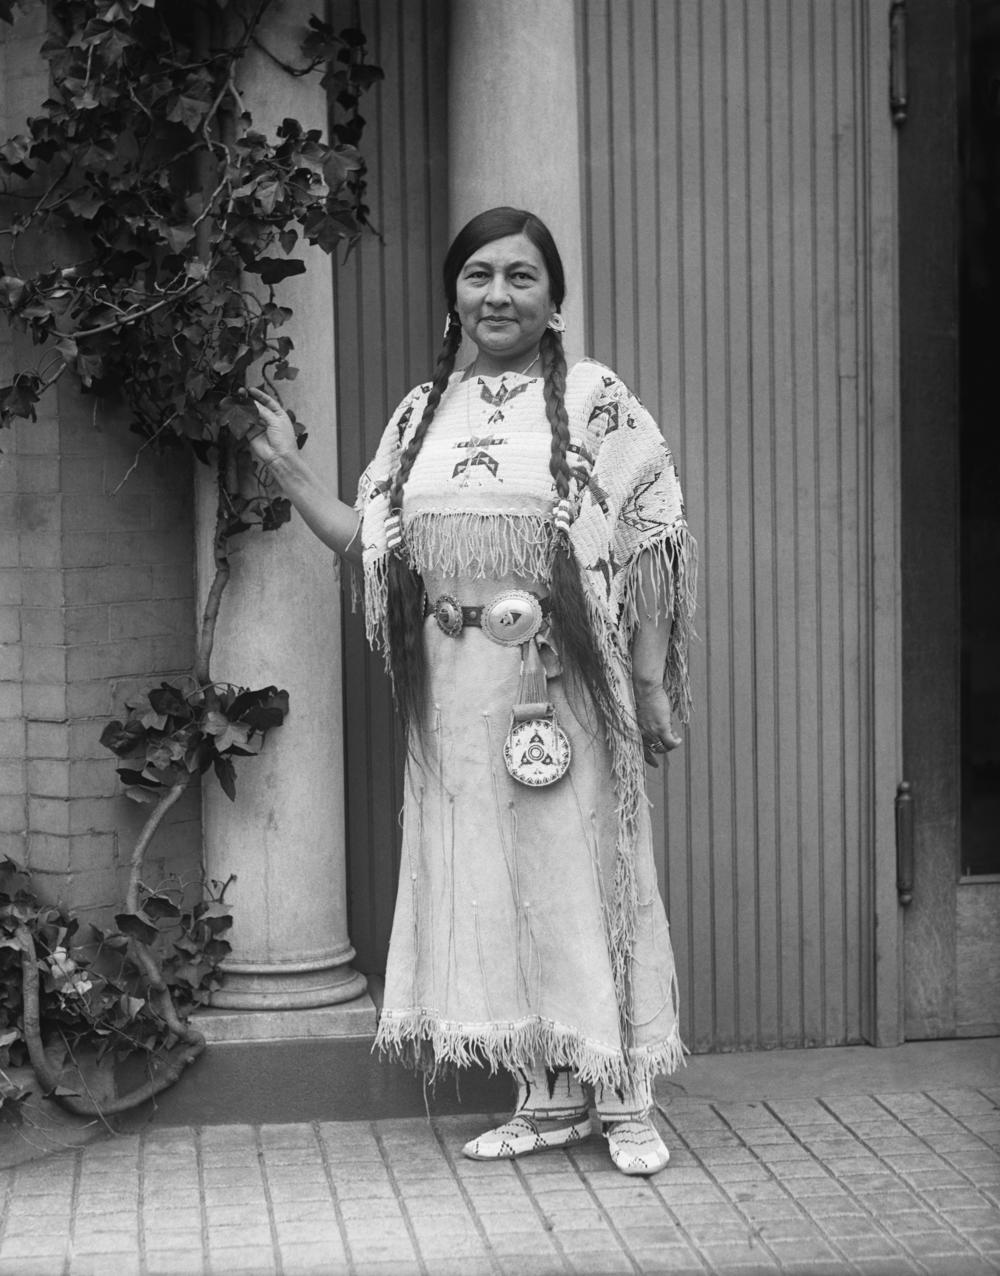 Voting rights activist Gertrude Simmons Bonnin (Zitkala-Sa) of the Yankton Sioux Nation was prominent in the women's suffrage community.